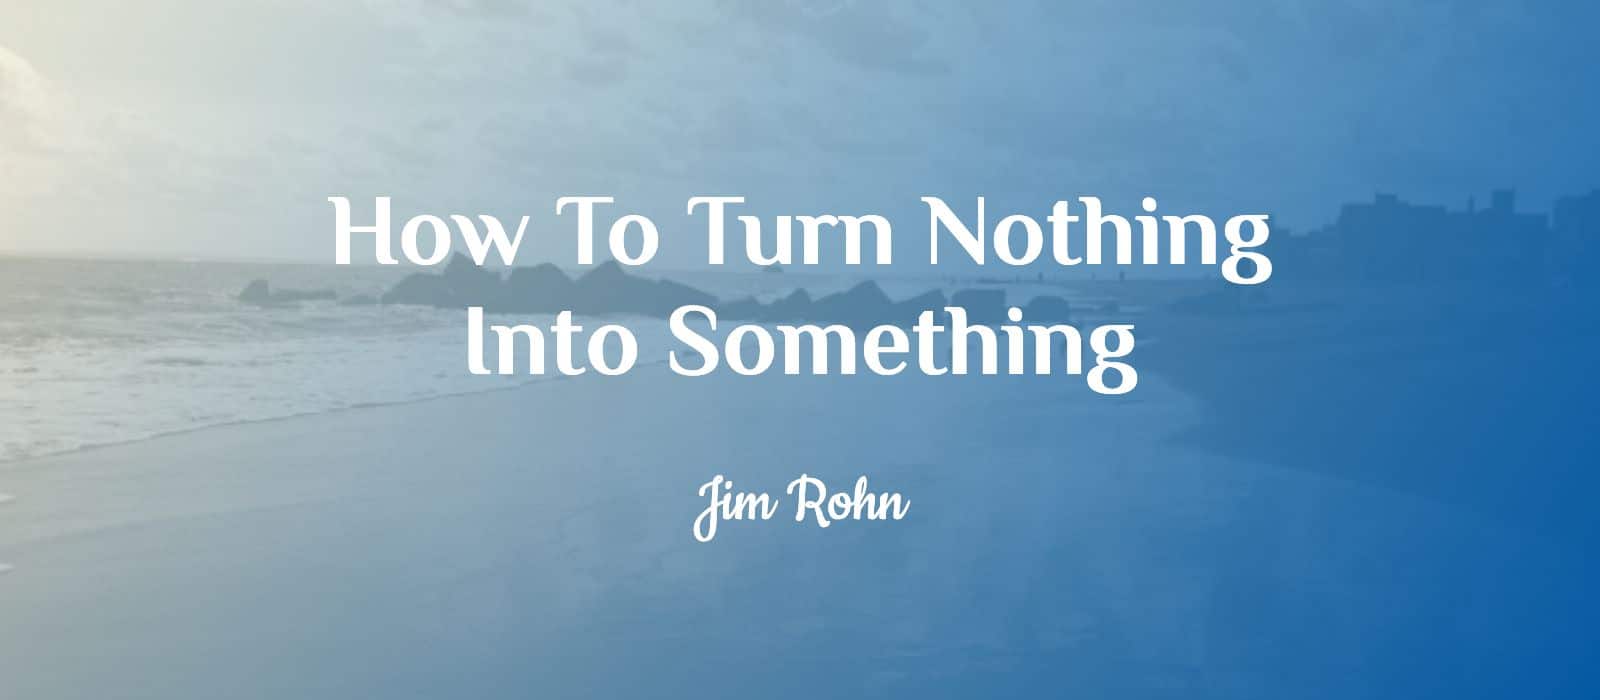 You are currently viewing Jim Rohn Teaches How To Turn Nothing Into Something